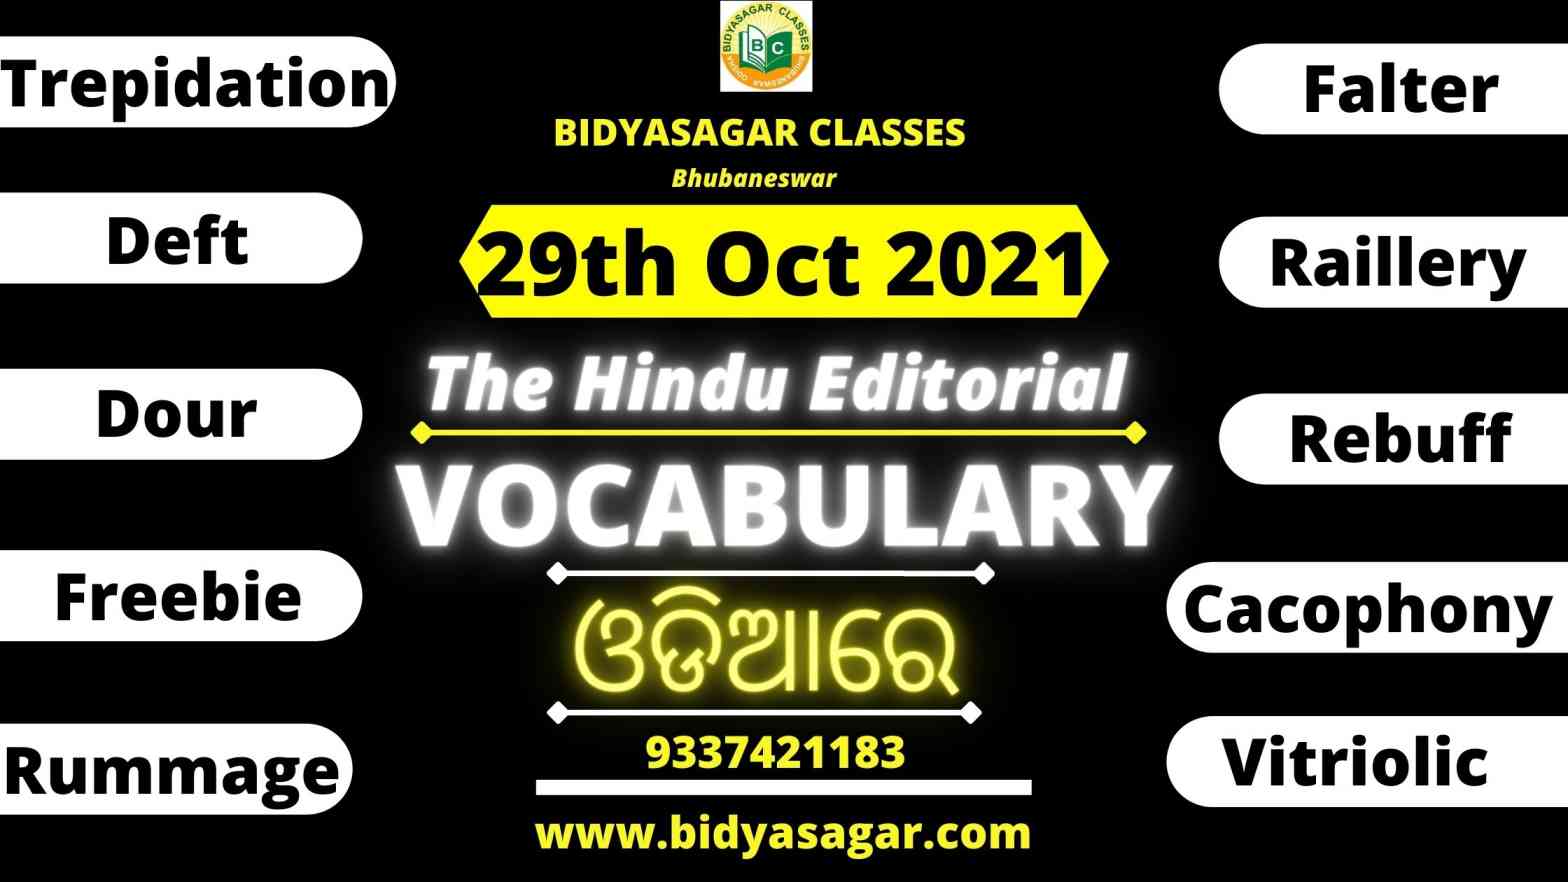 The Hindu Editorial Vocabulary of 29th October 2021